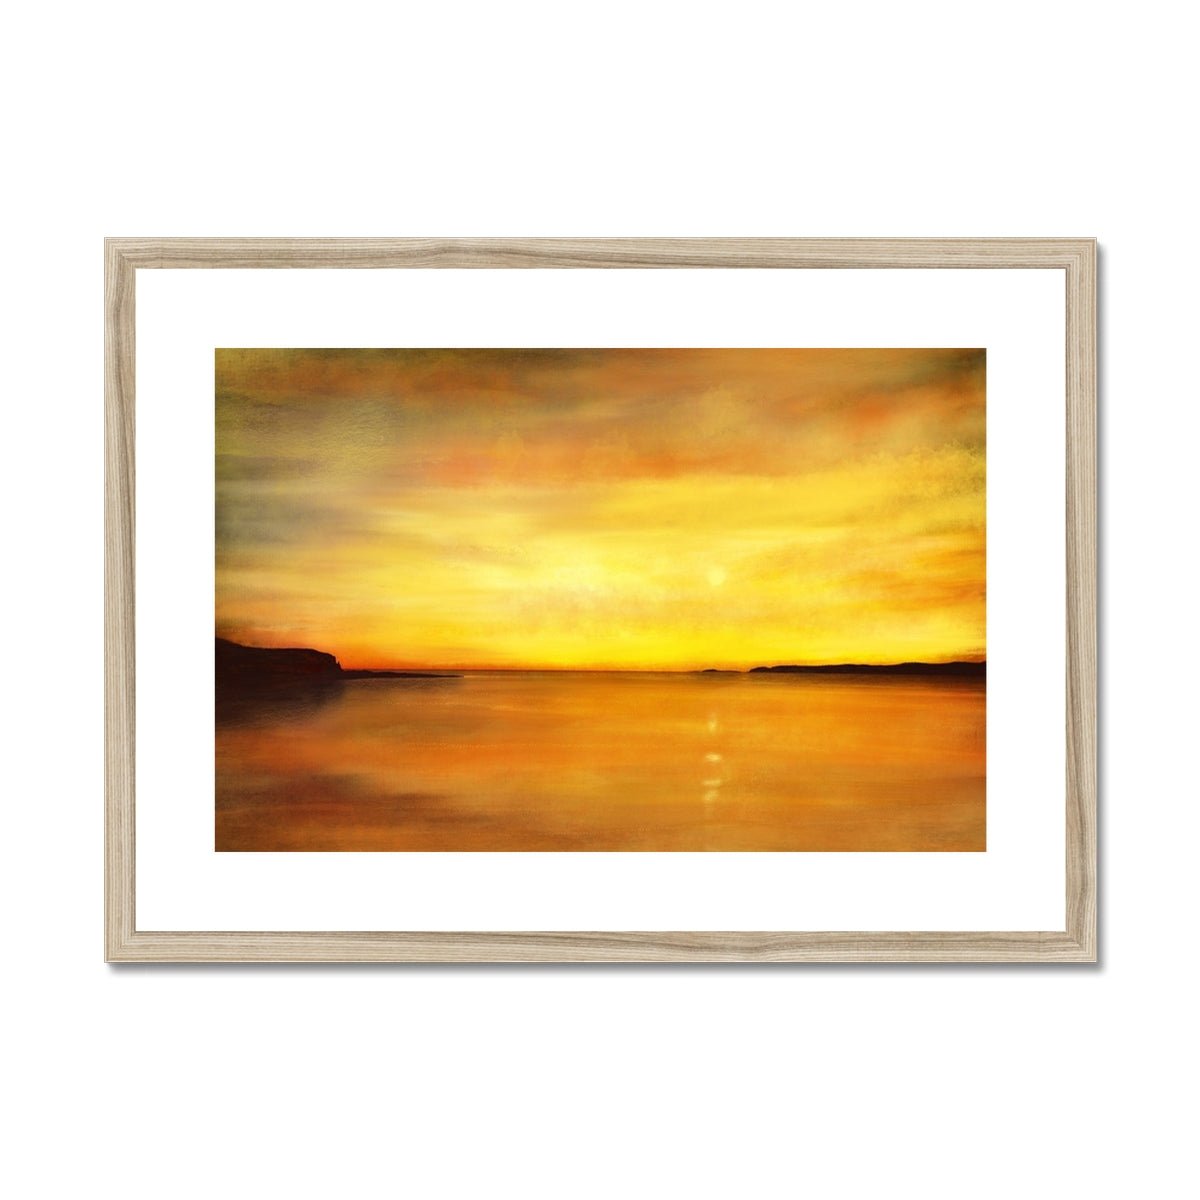 King's Cave Sunset Arran Painting | Framed & Mounted Prints From Scotland-Framed & Mounted Prints-Arran Art Gallery-A2 Landscape-Natural Frame-Paintings, Prints, Homeware, Art Gifts From Scotland By Scottish Artist Kevin Hunter